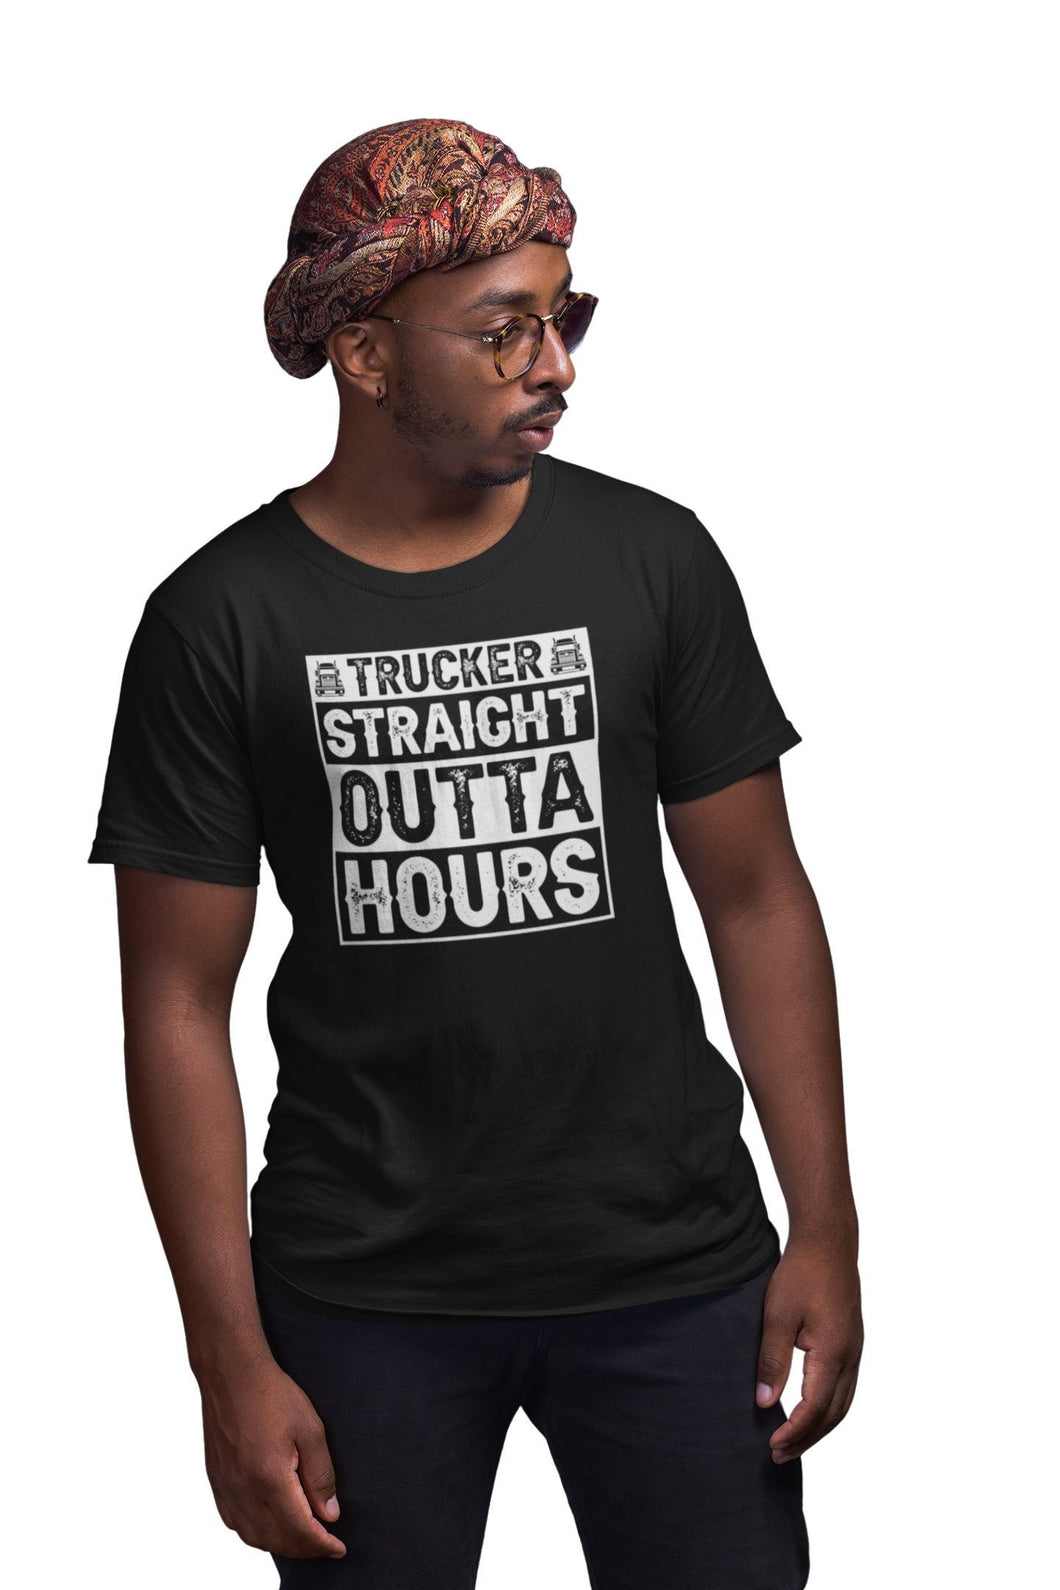 Trucker Straight Outta Hours Shirt, Funny Trucker Shirt, Truck Driver Shirt, Truck Lover Shirt